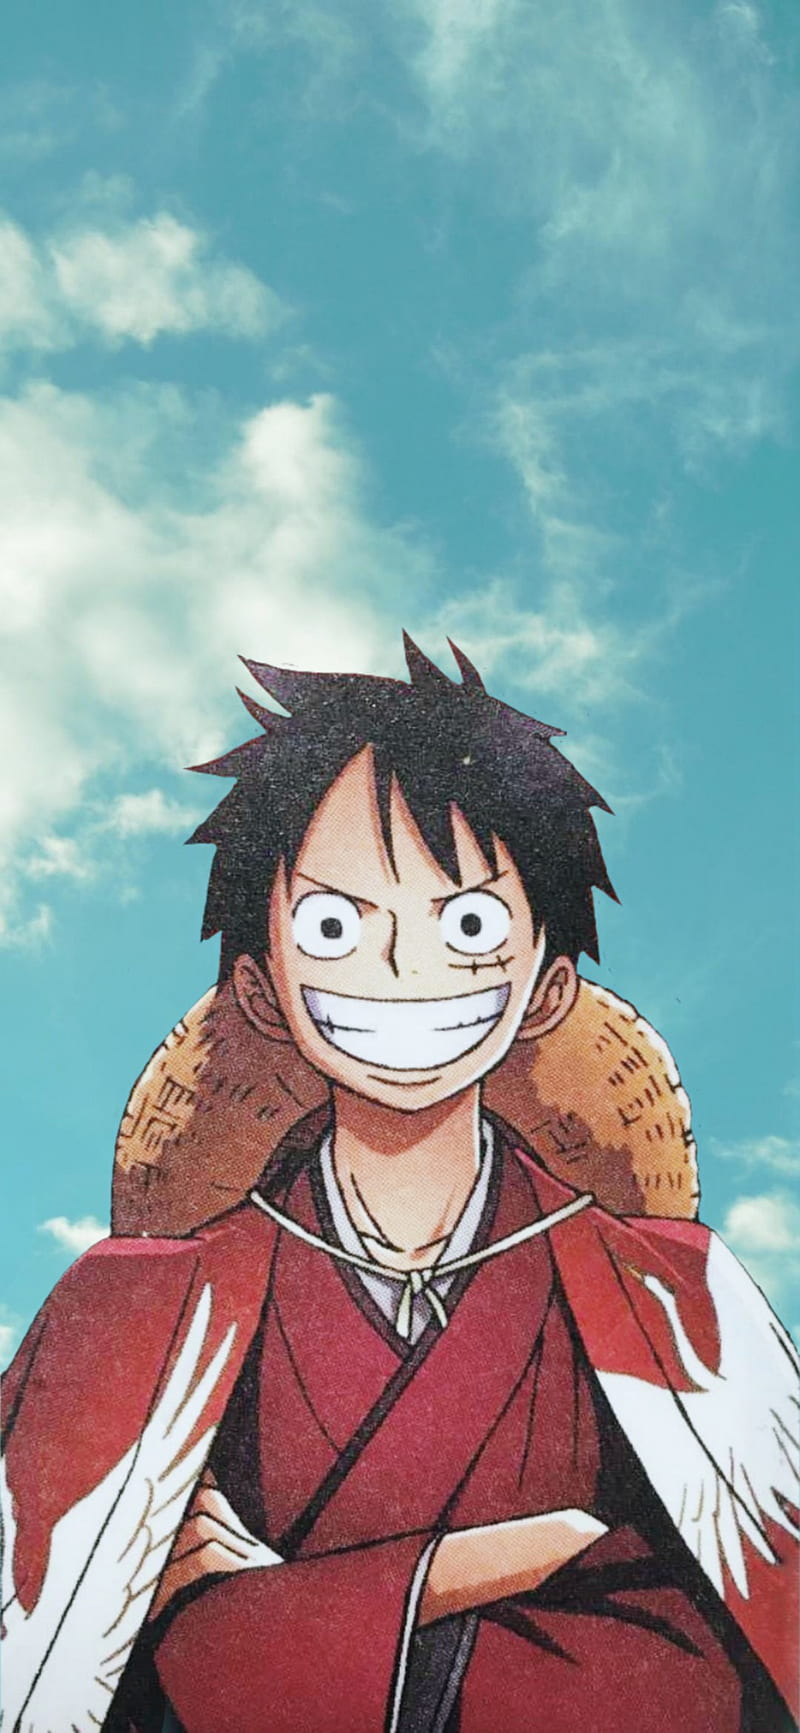 Monkey D Luffy Wallpaper Browse Monkey D Luffy Wallpaper with collections  of Android Anime C  Monkey d luffy wallpapers Manga anime one piece One  piece luffy